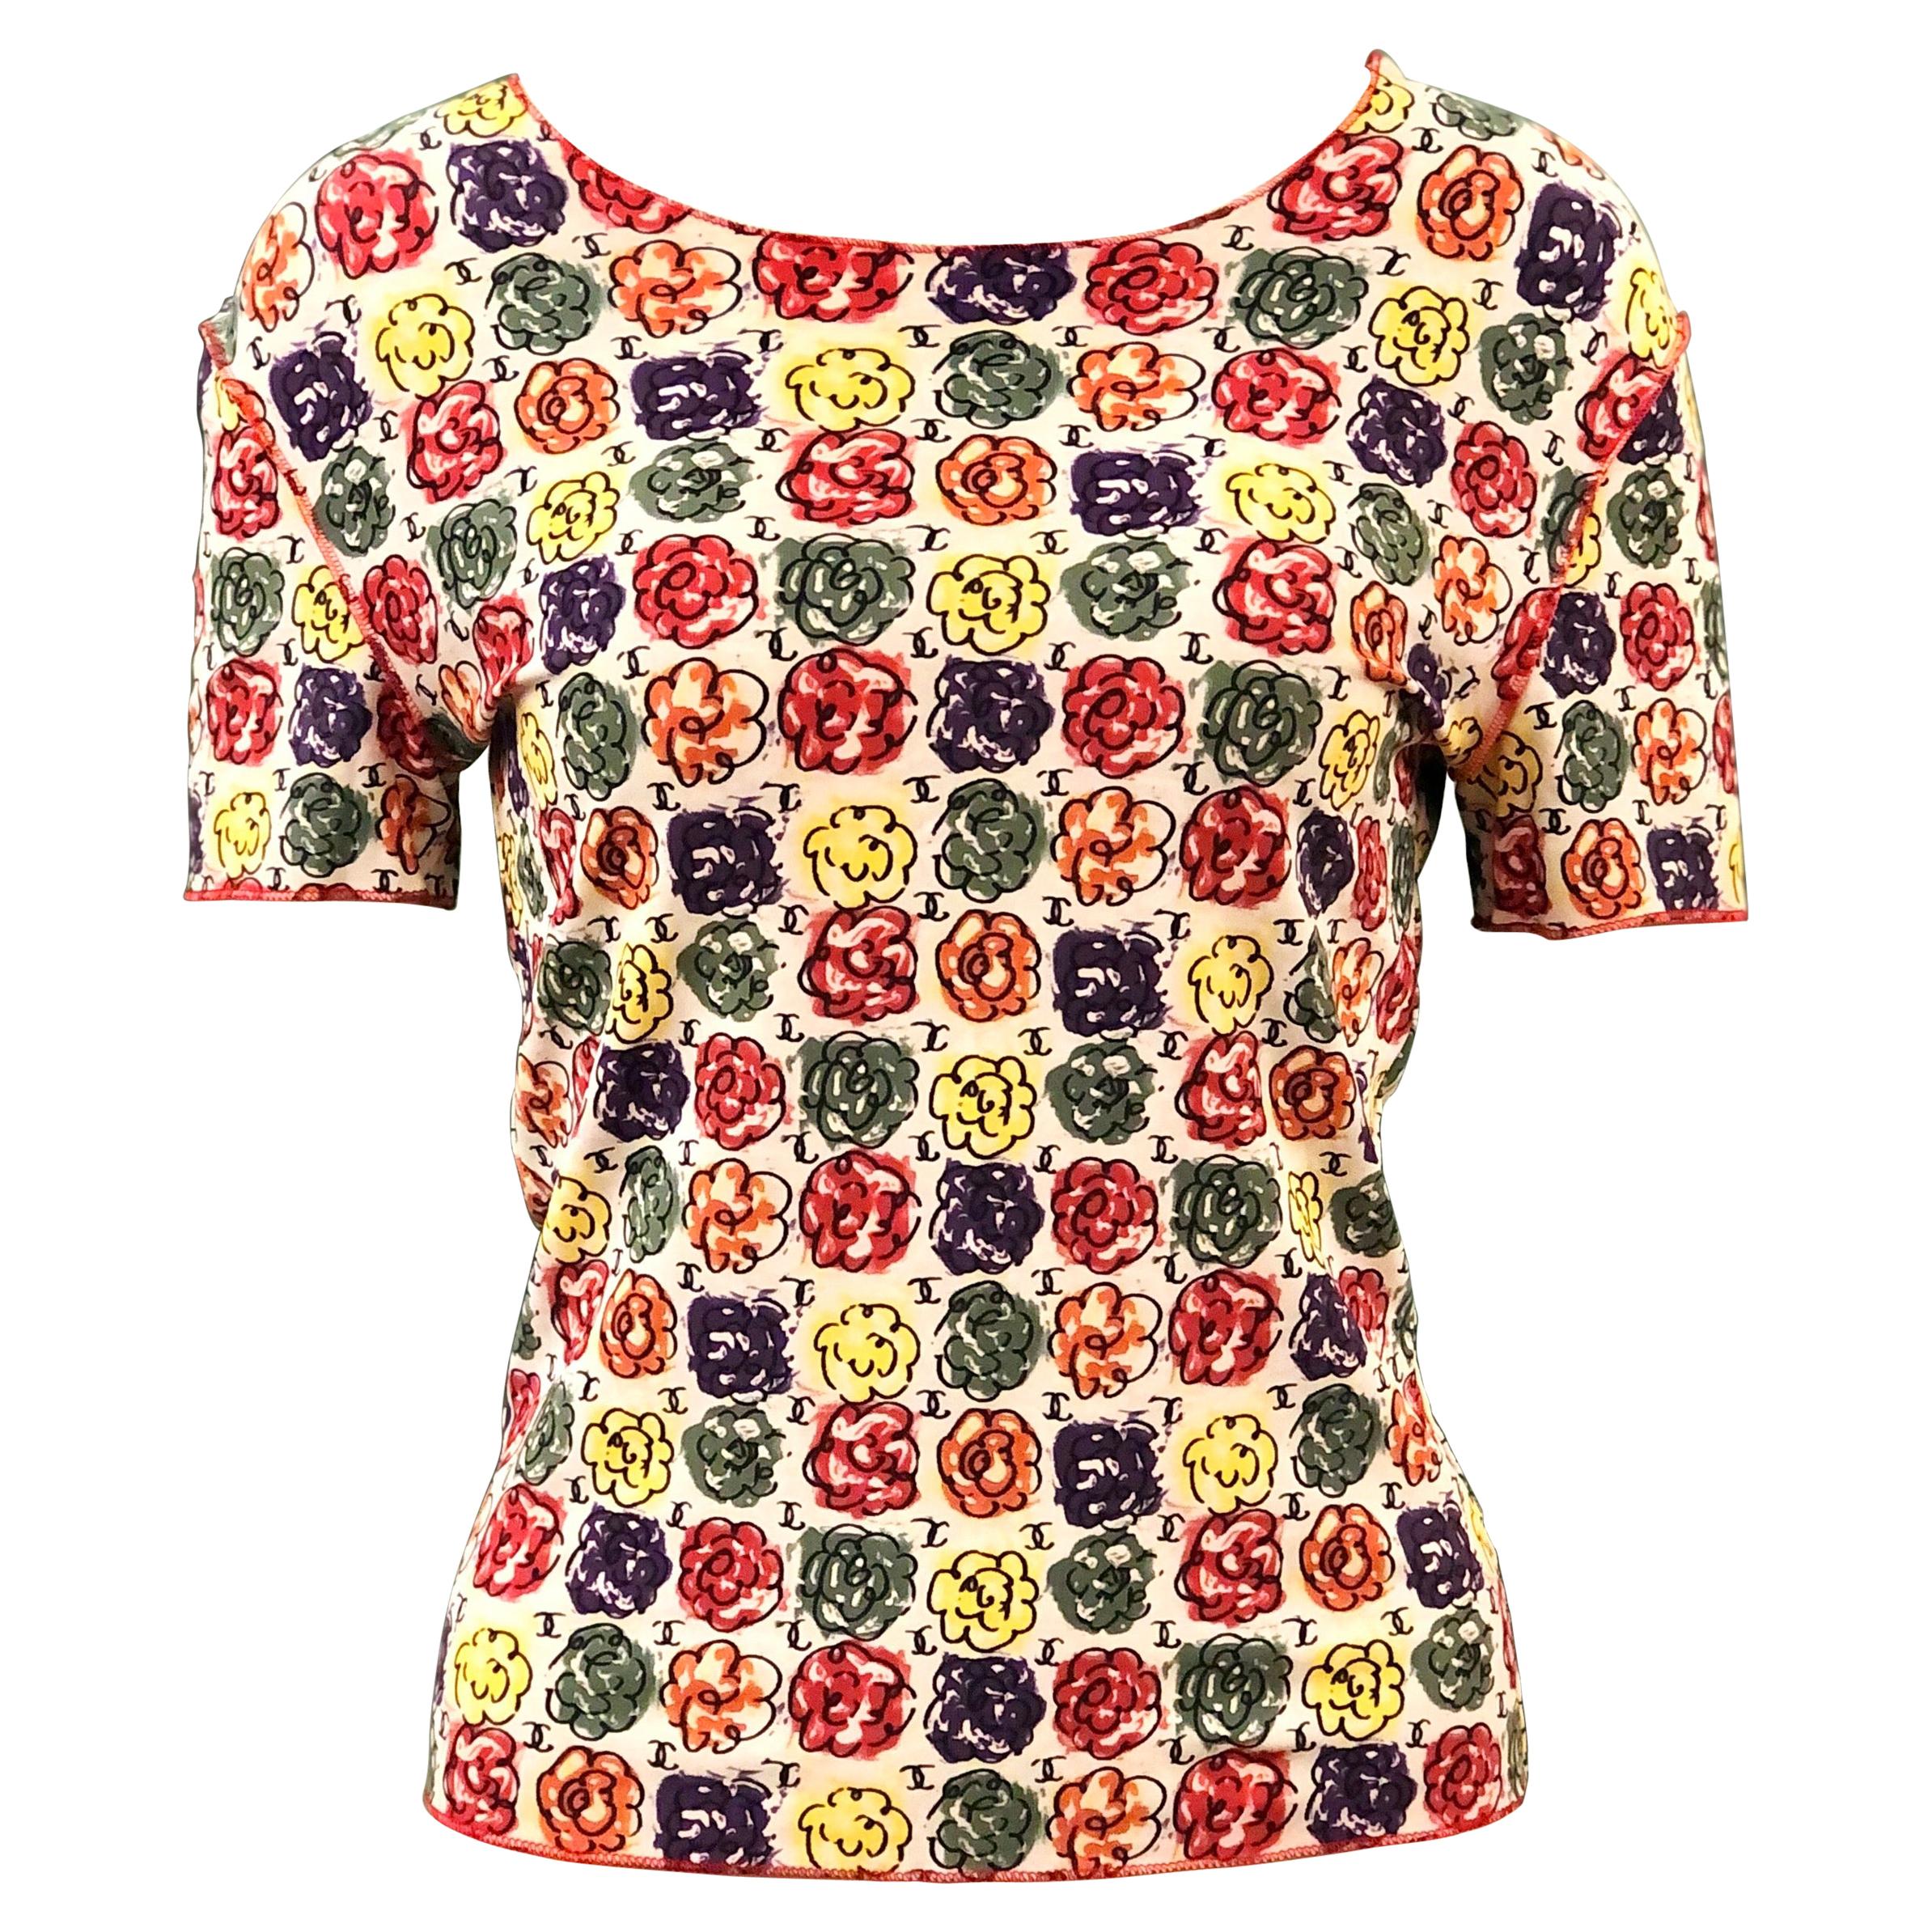 Chanel Multi-Coloured Floral Print T-Shirt 